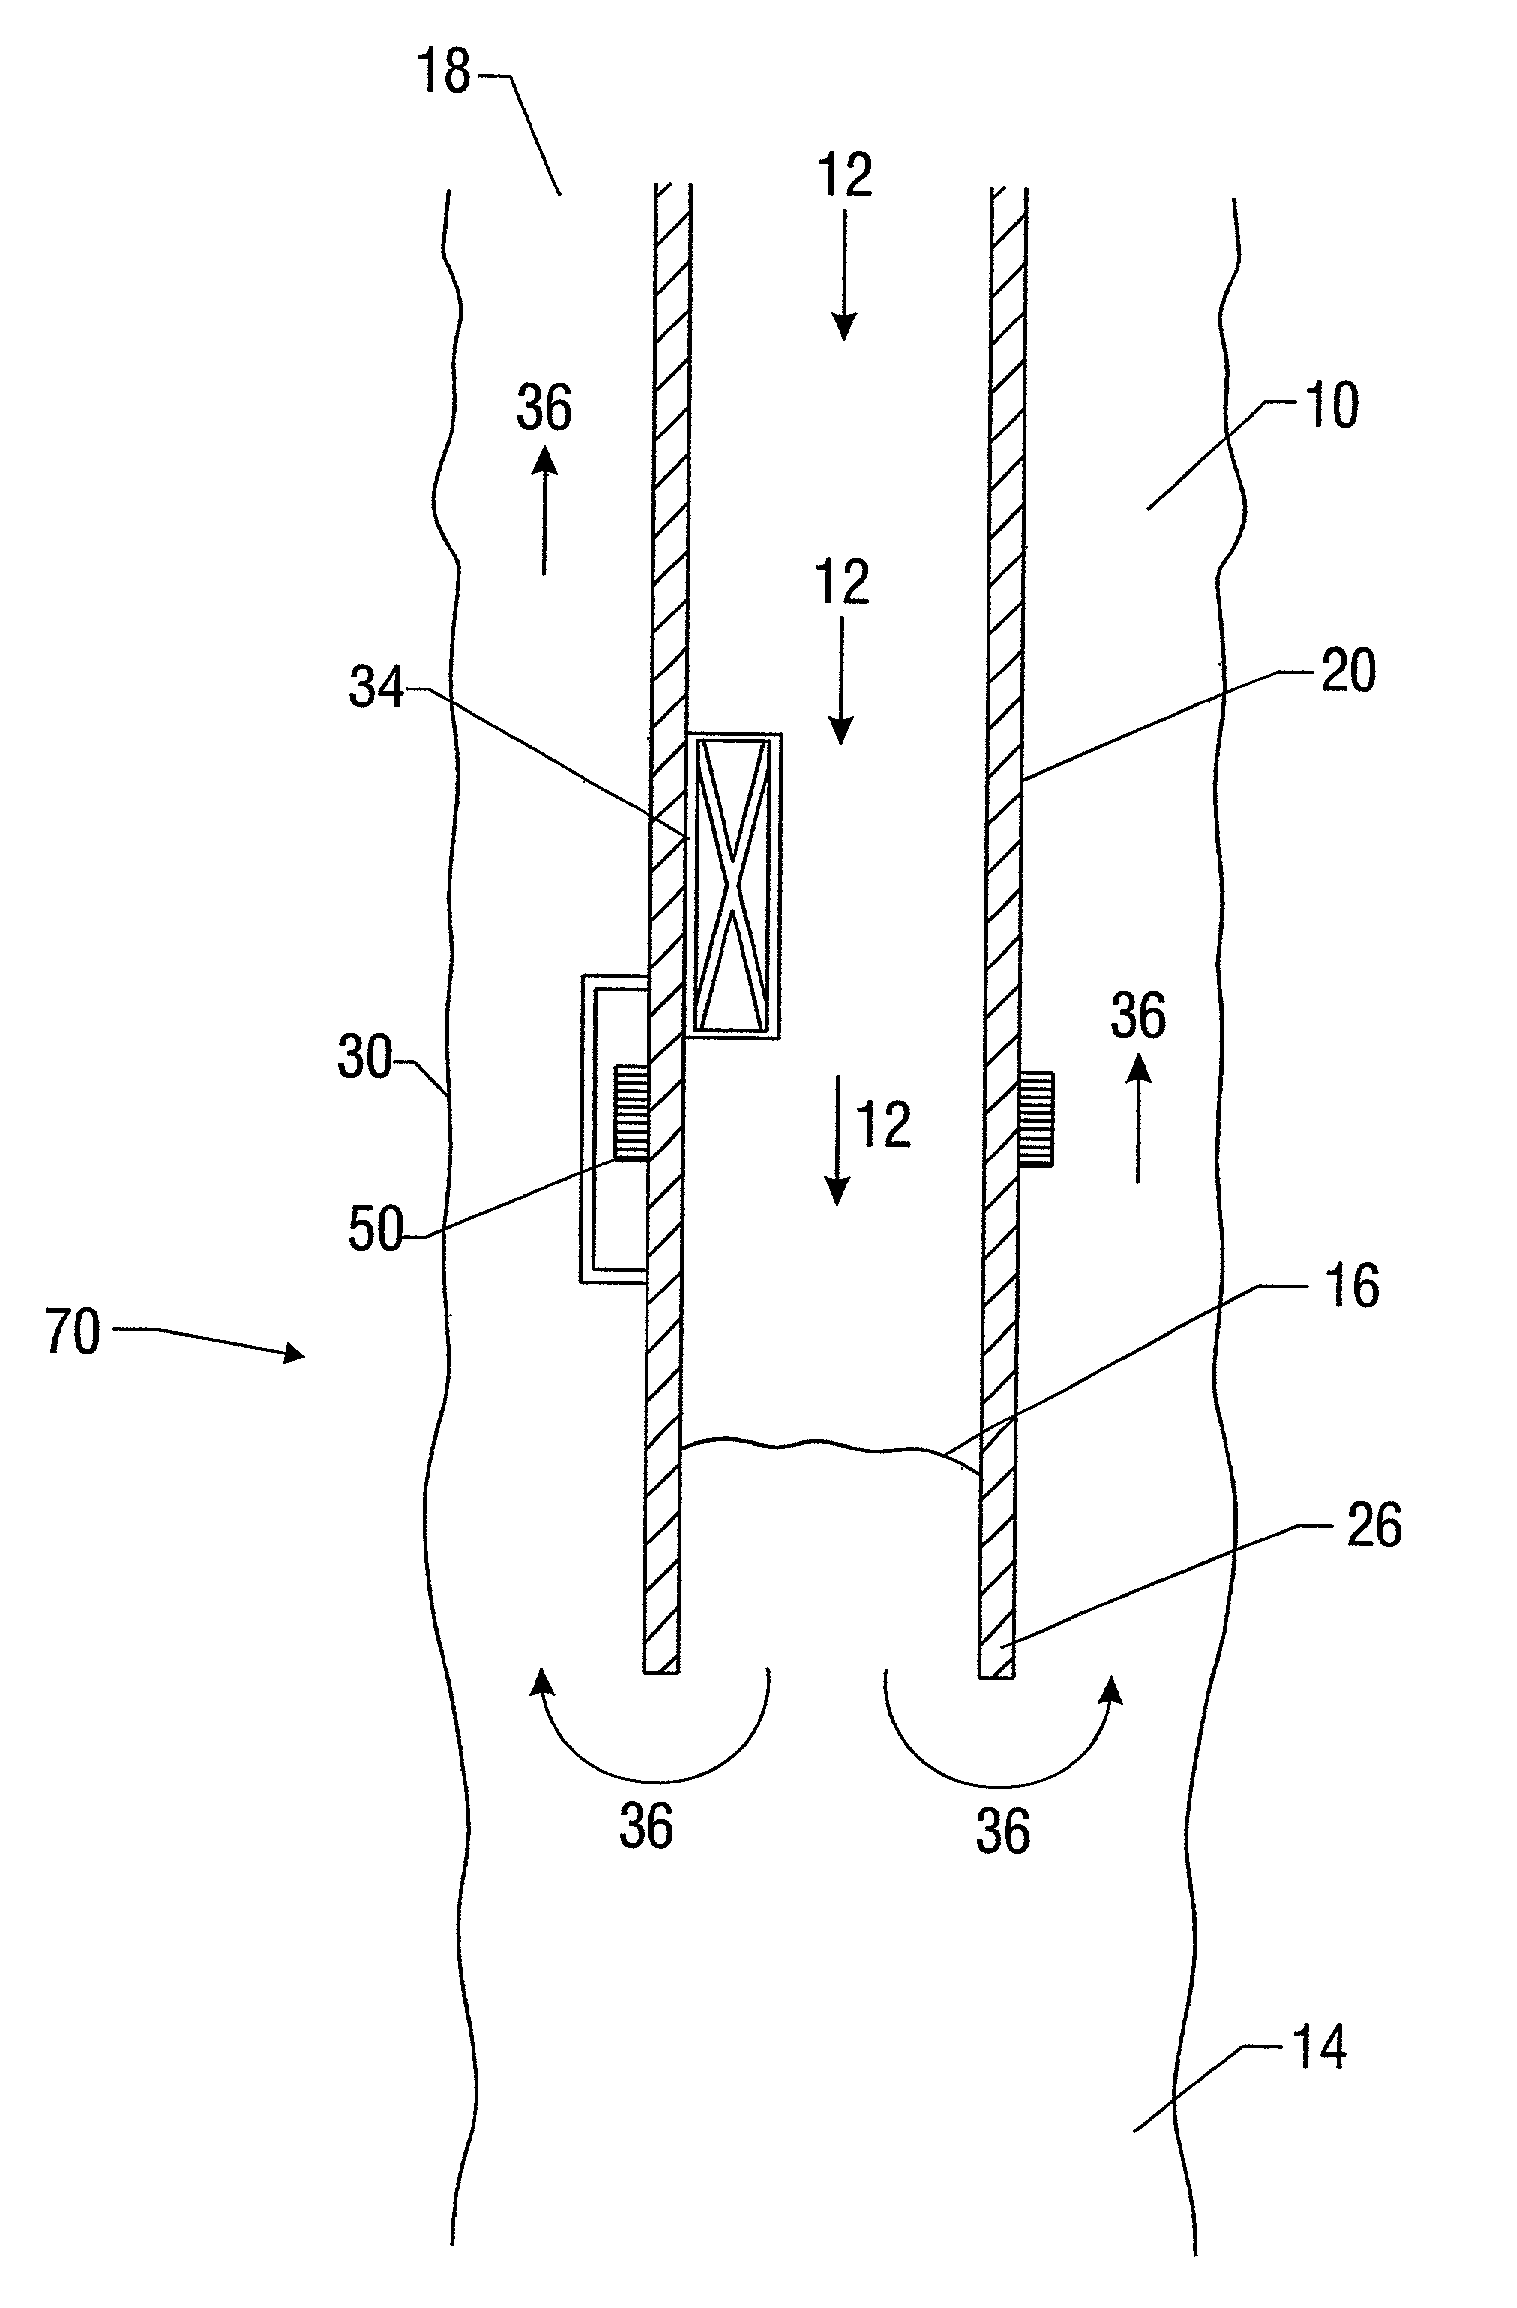 Apparatus and method of detecting interfaces between well fluids